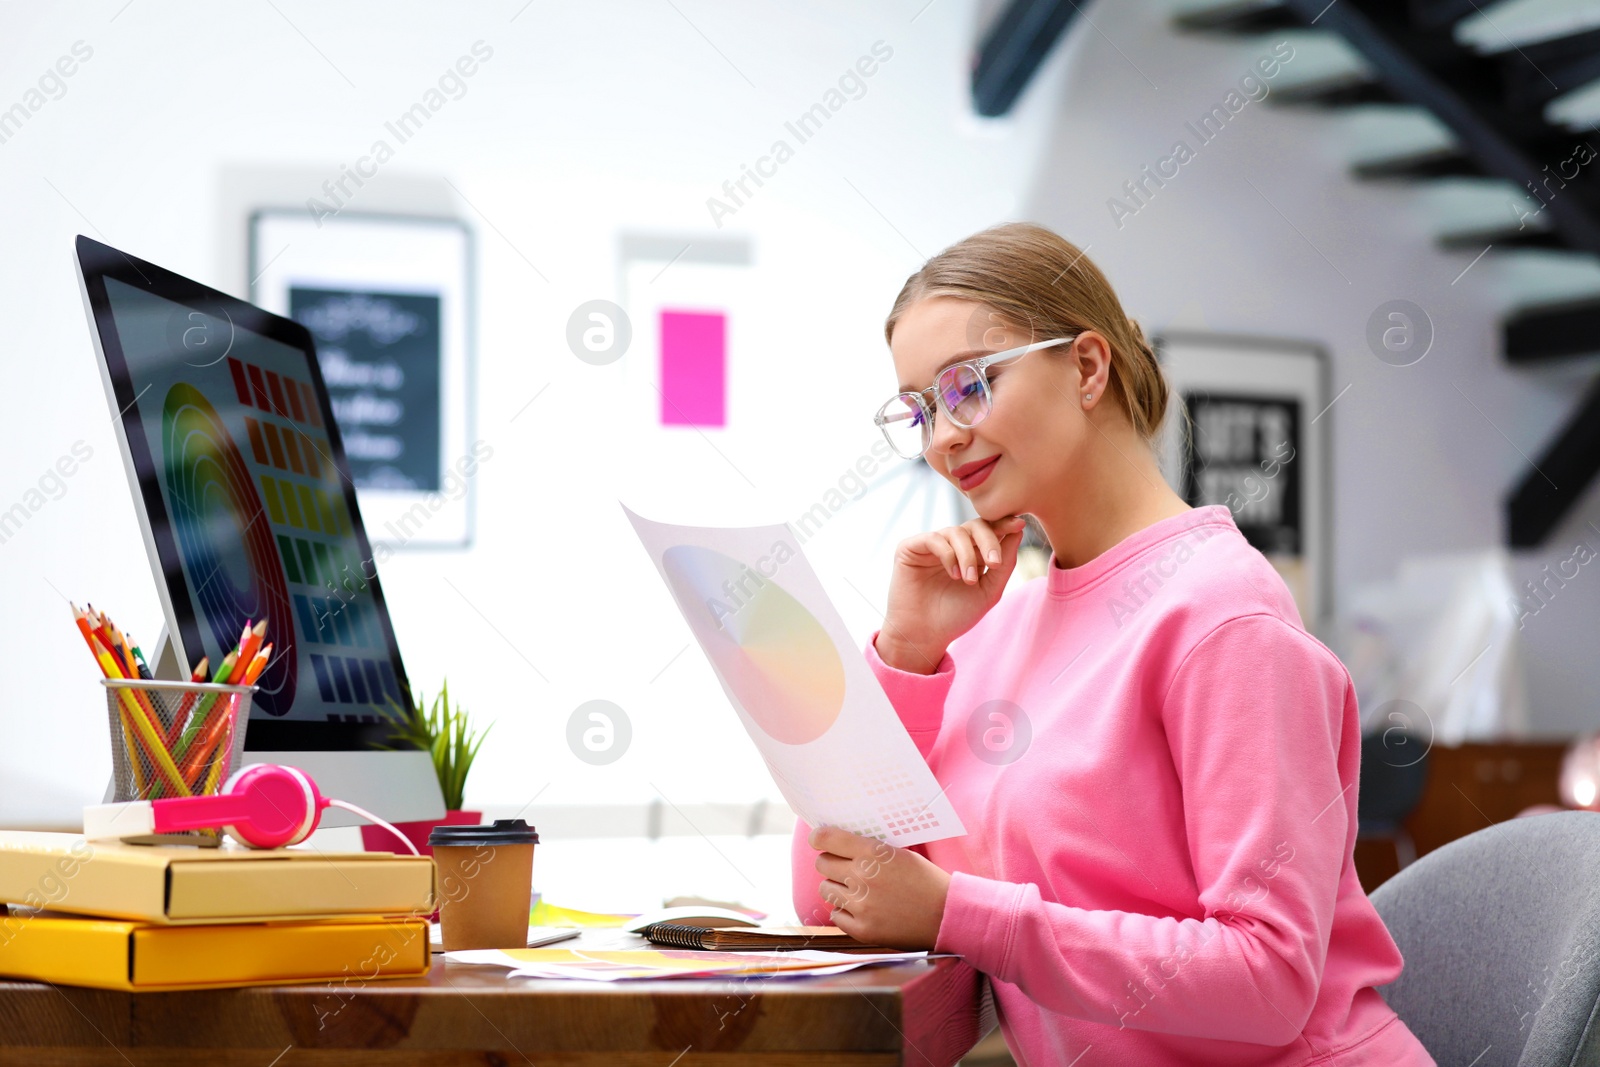 Photo of Professional designer working with computer at table in office